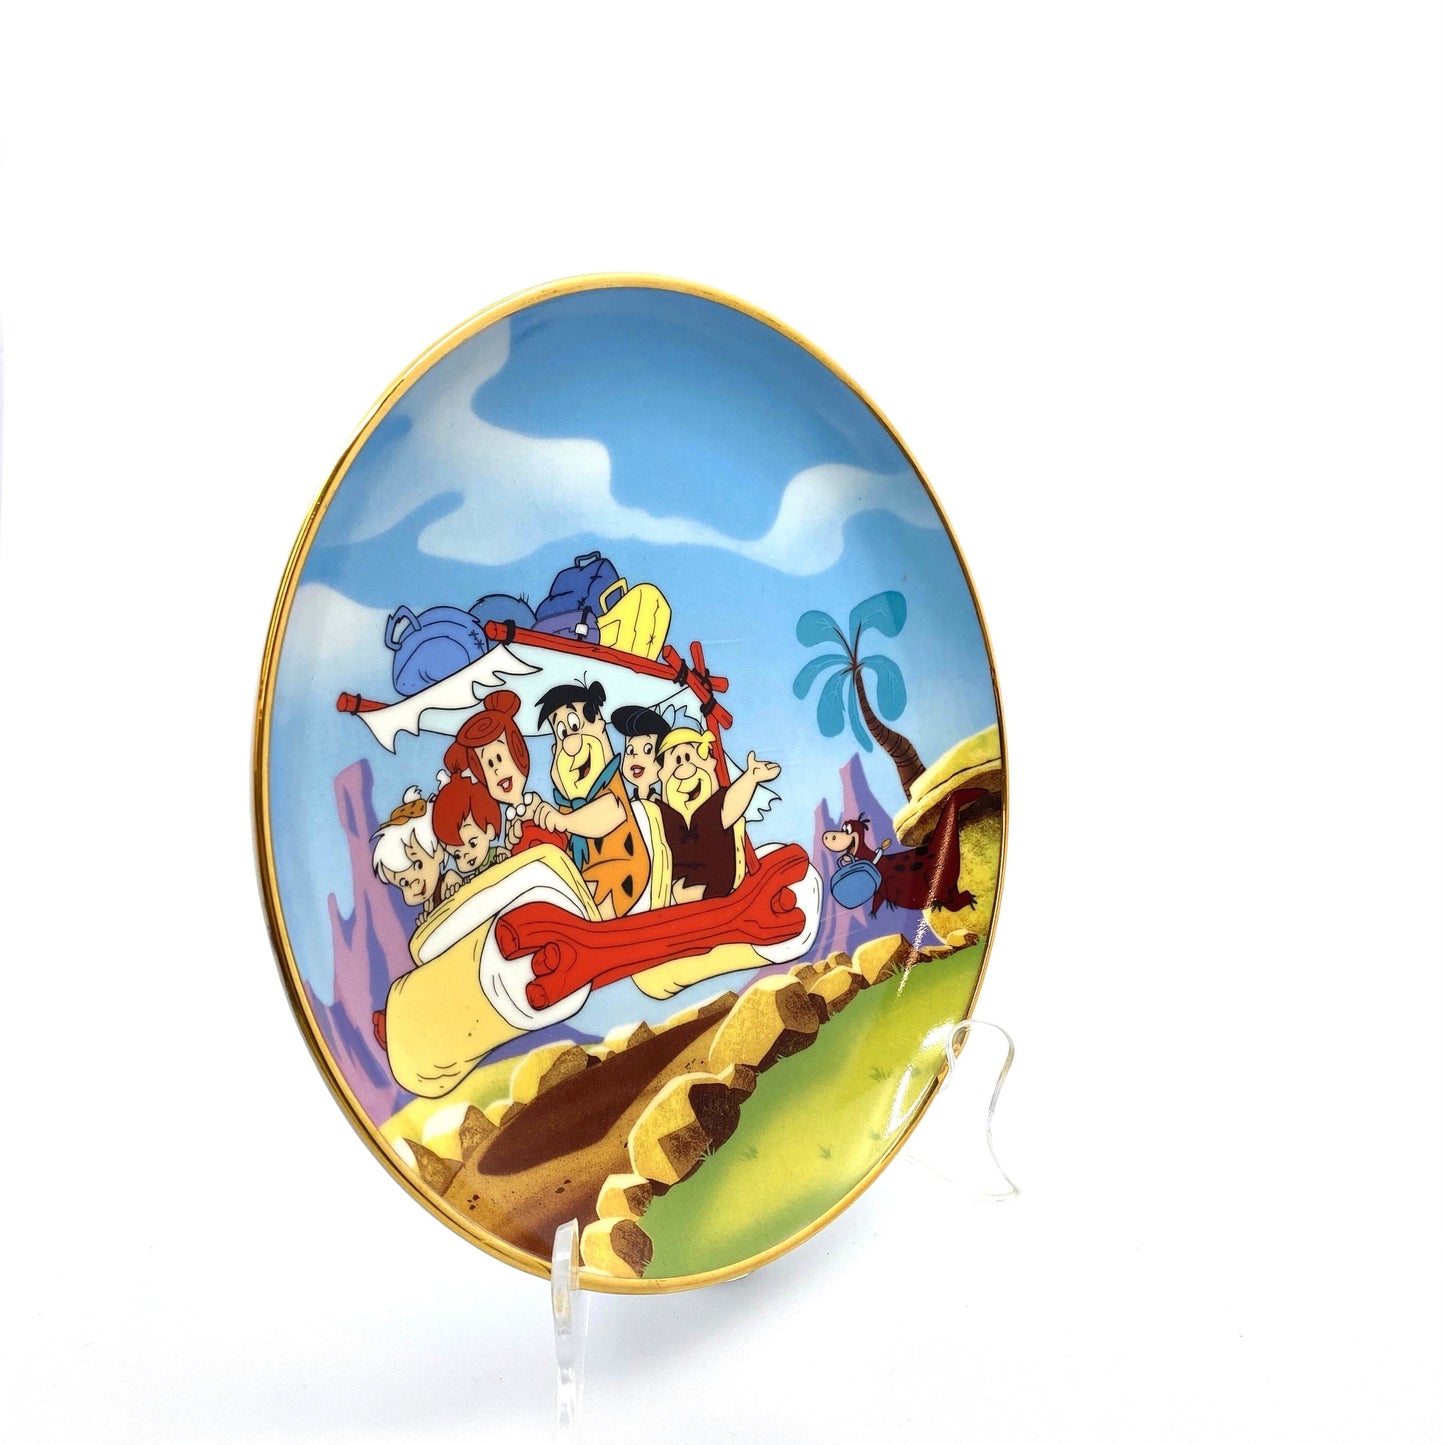 The Franklin Mint Flinstones Collectible Plate “The Original Stone-Age Family” 1992 Limited Edition